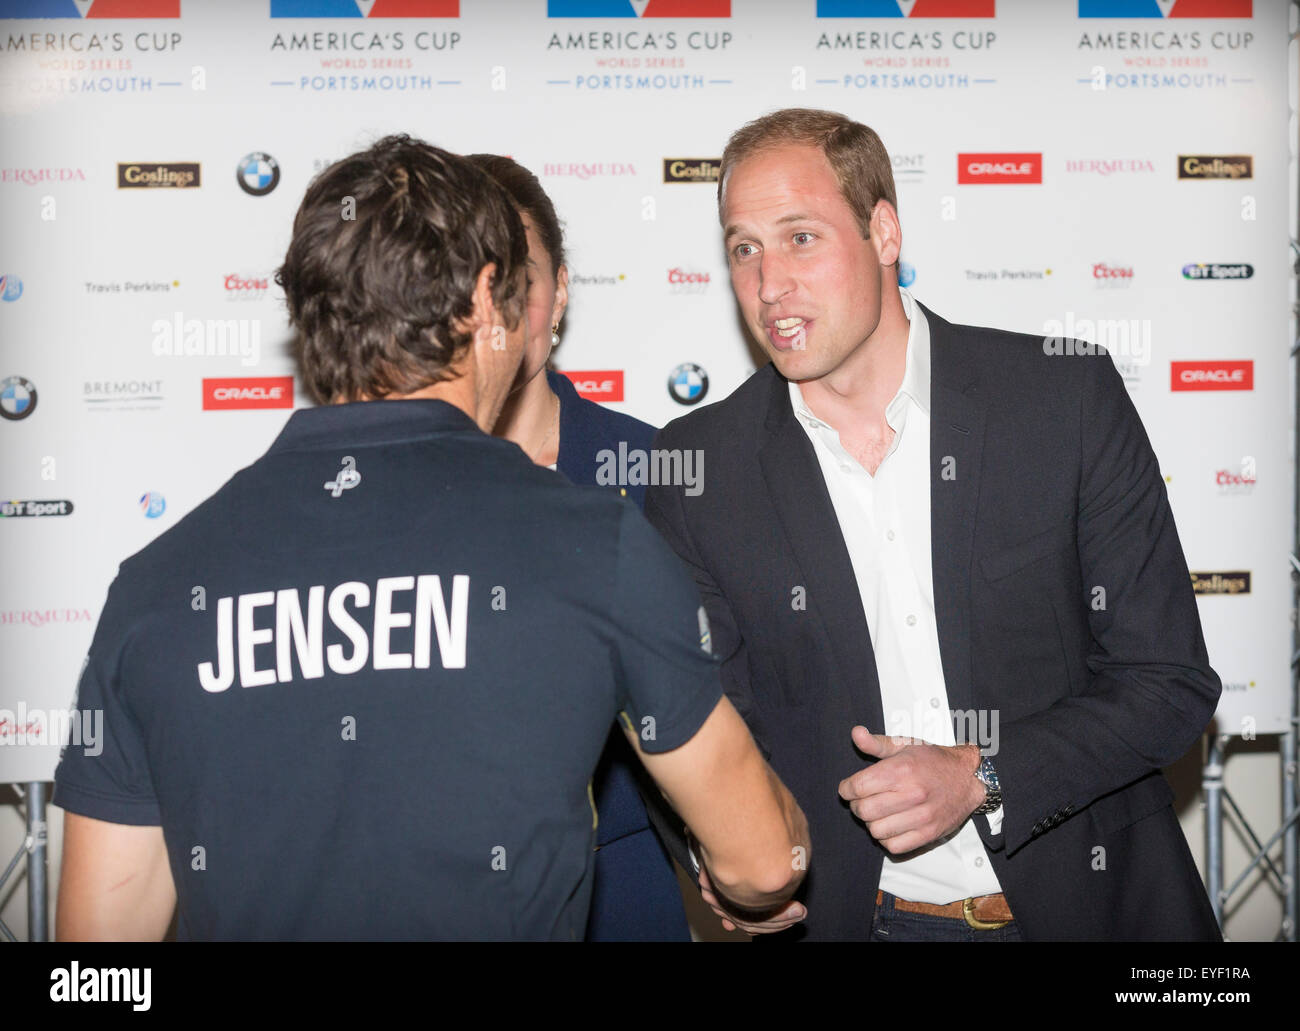 The Duke of Cambridge chats with Iain Jensen of Artemis Racing before his wife, the Duchess, presented the America's Stock Photo